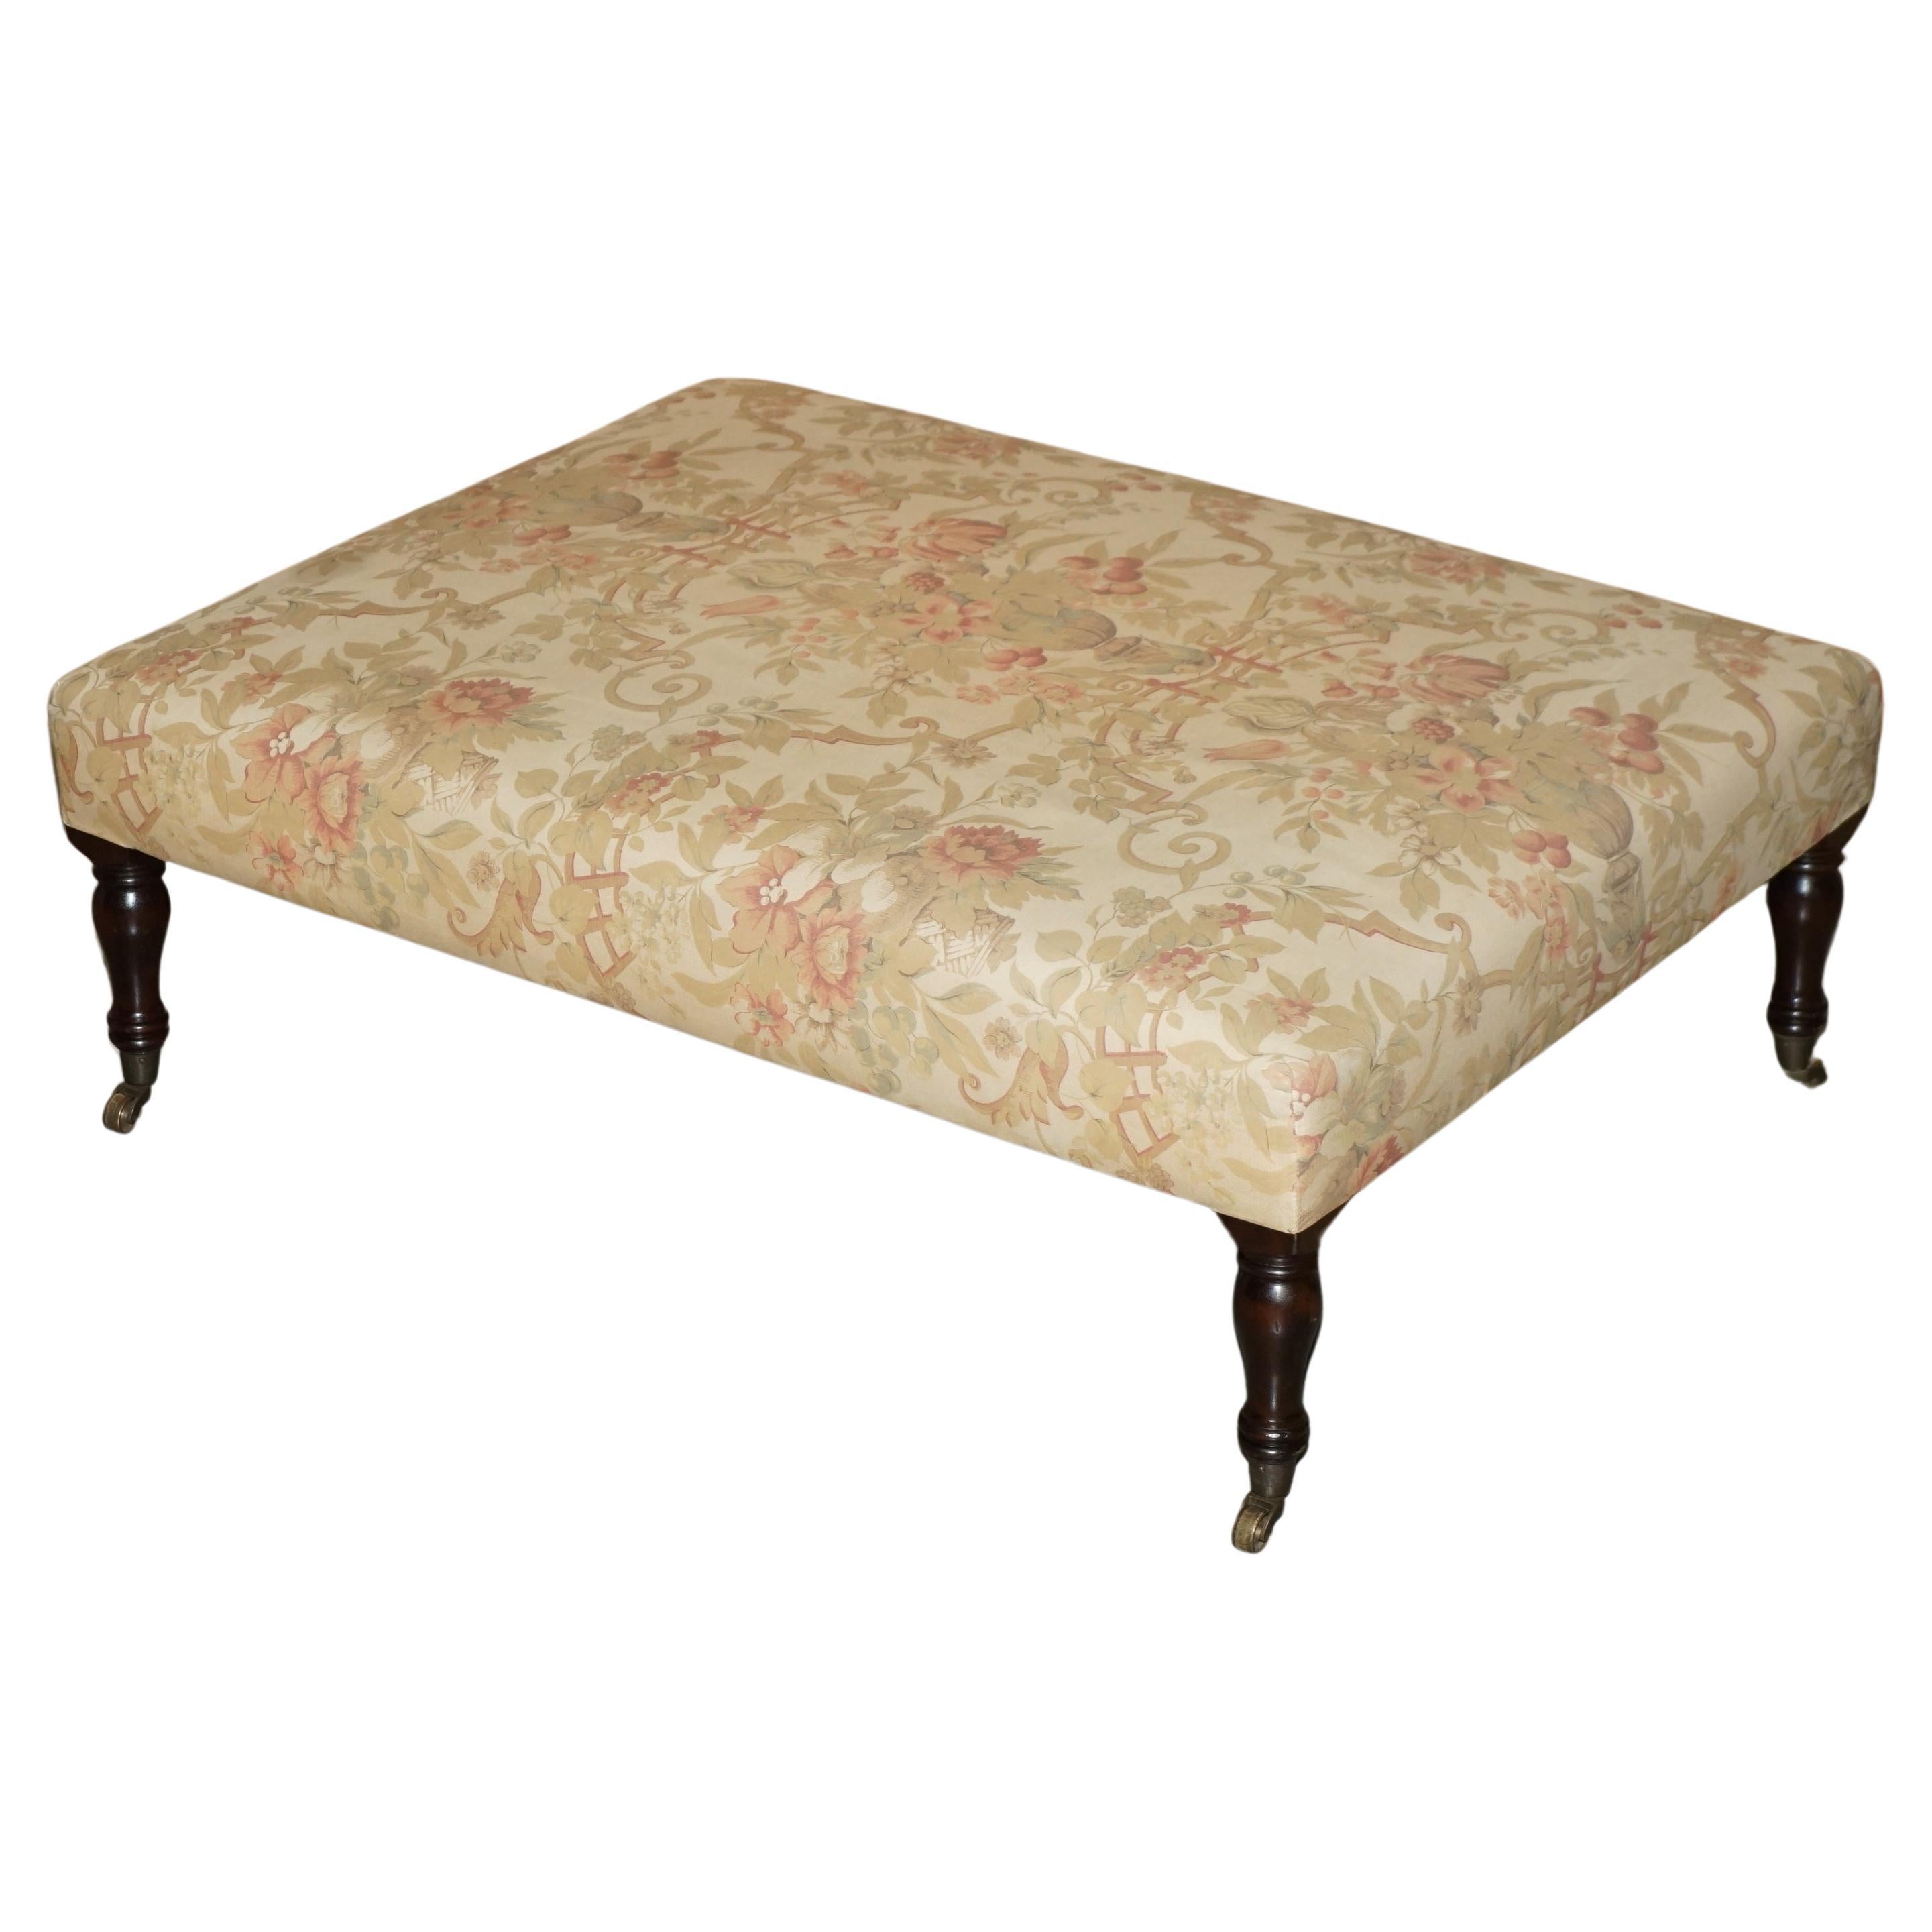 COLLECTABLE VERY LARGE ViNTAGE GEORGE SMITH CHELSEA FLORAL FOOTSTOOL OTTOMAN